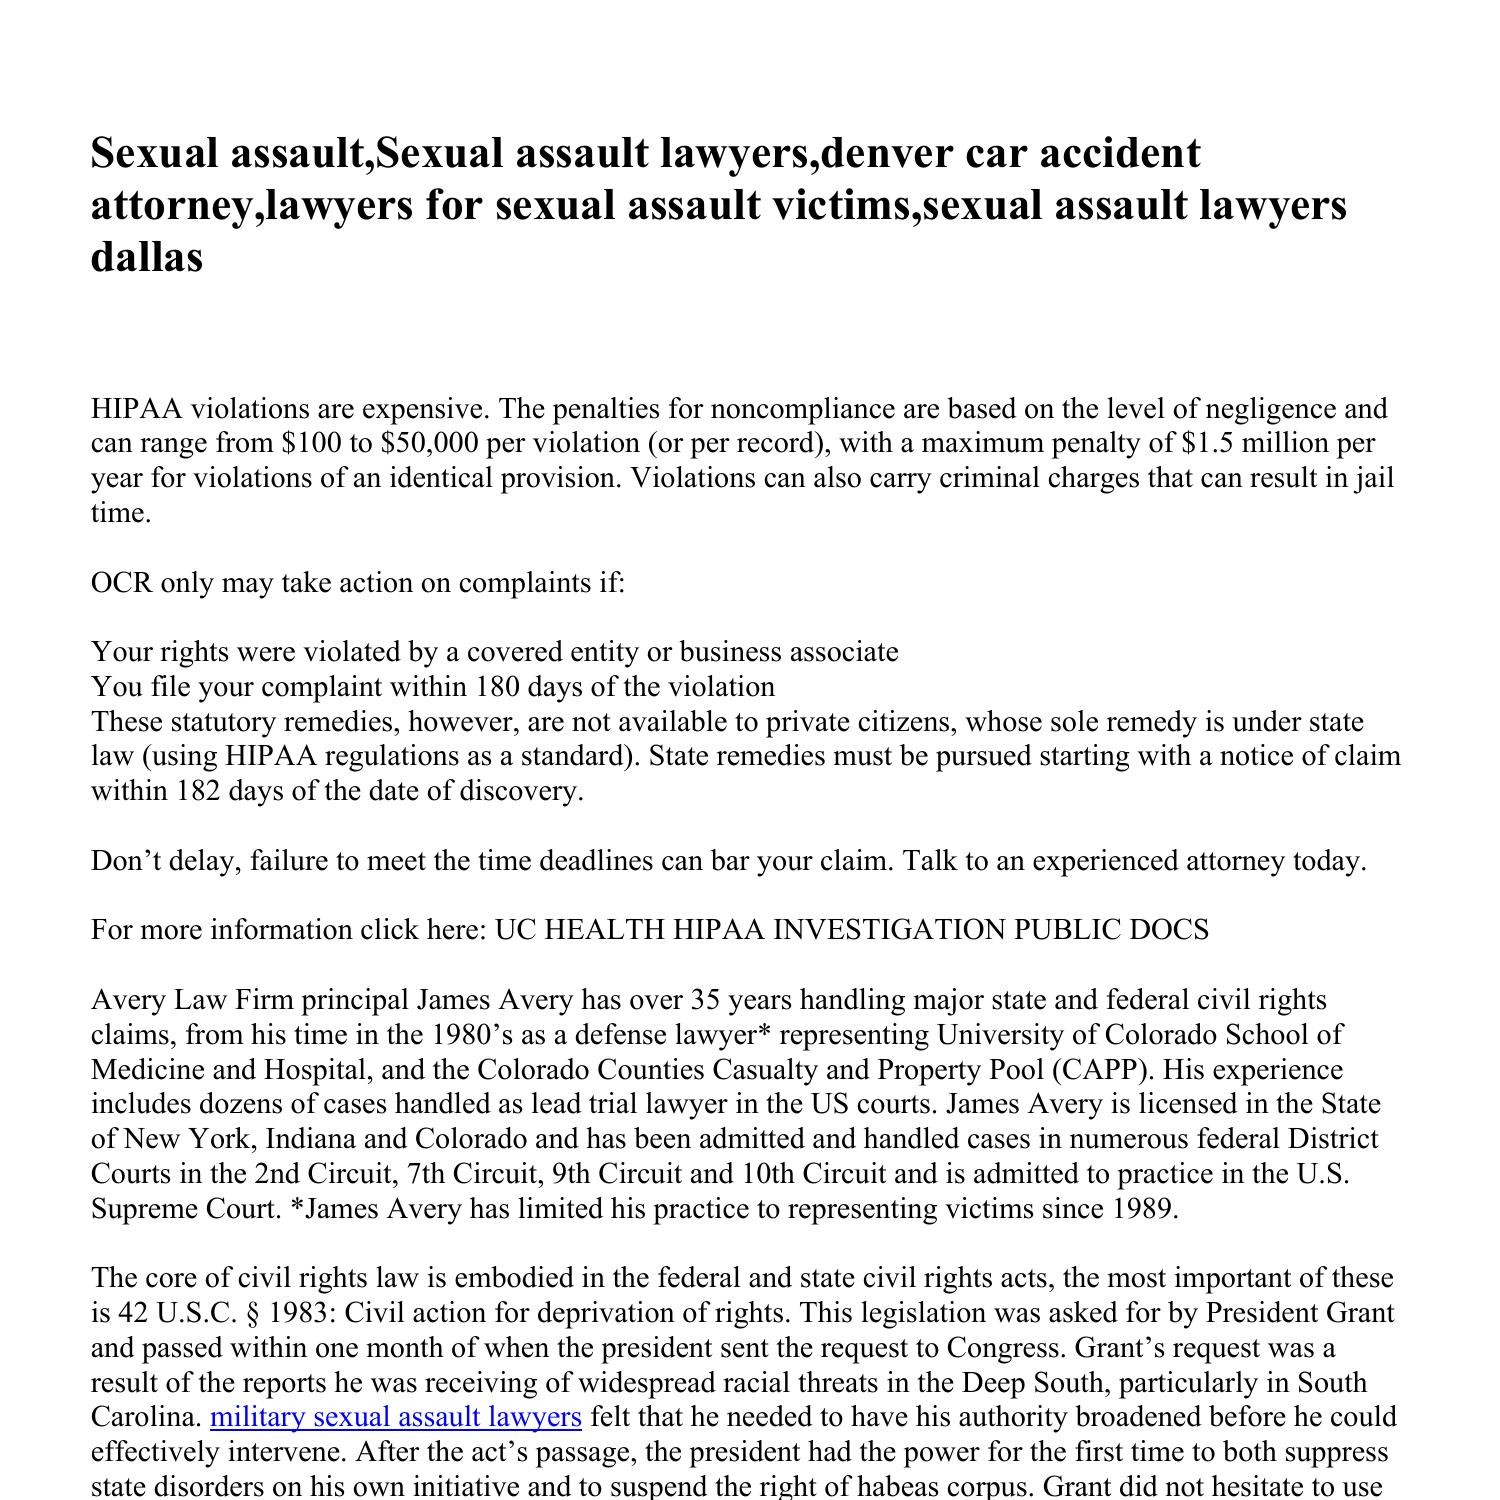 Sexual Assaultsexual Assault Lawyersdenver Car Accident Attorneylawyers For Sexual Assault